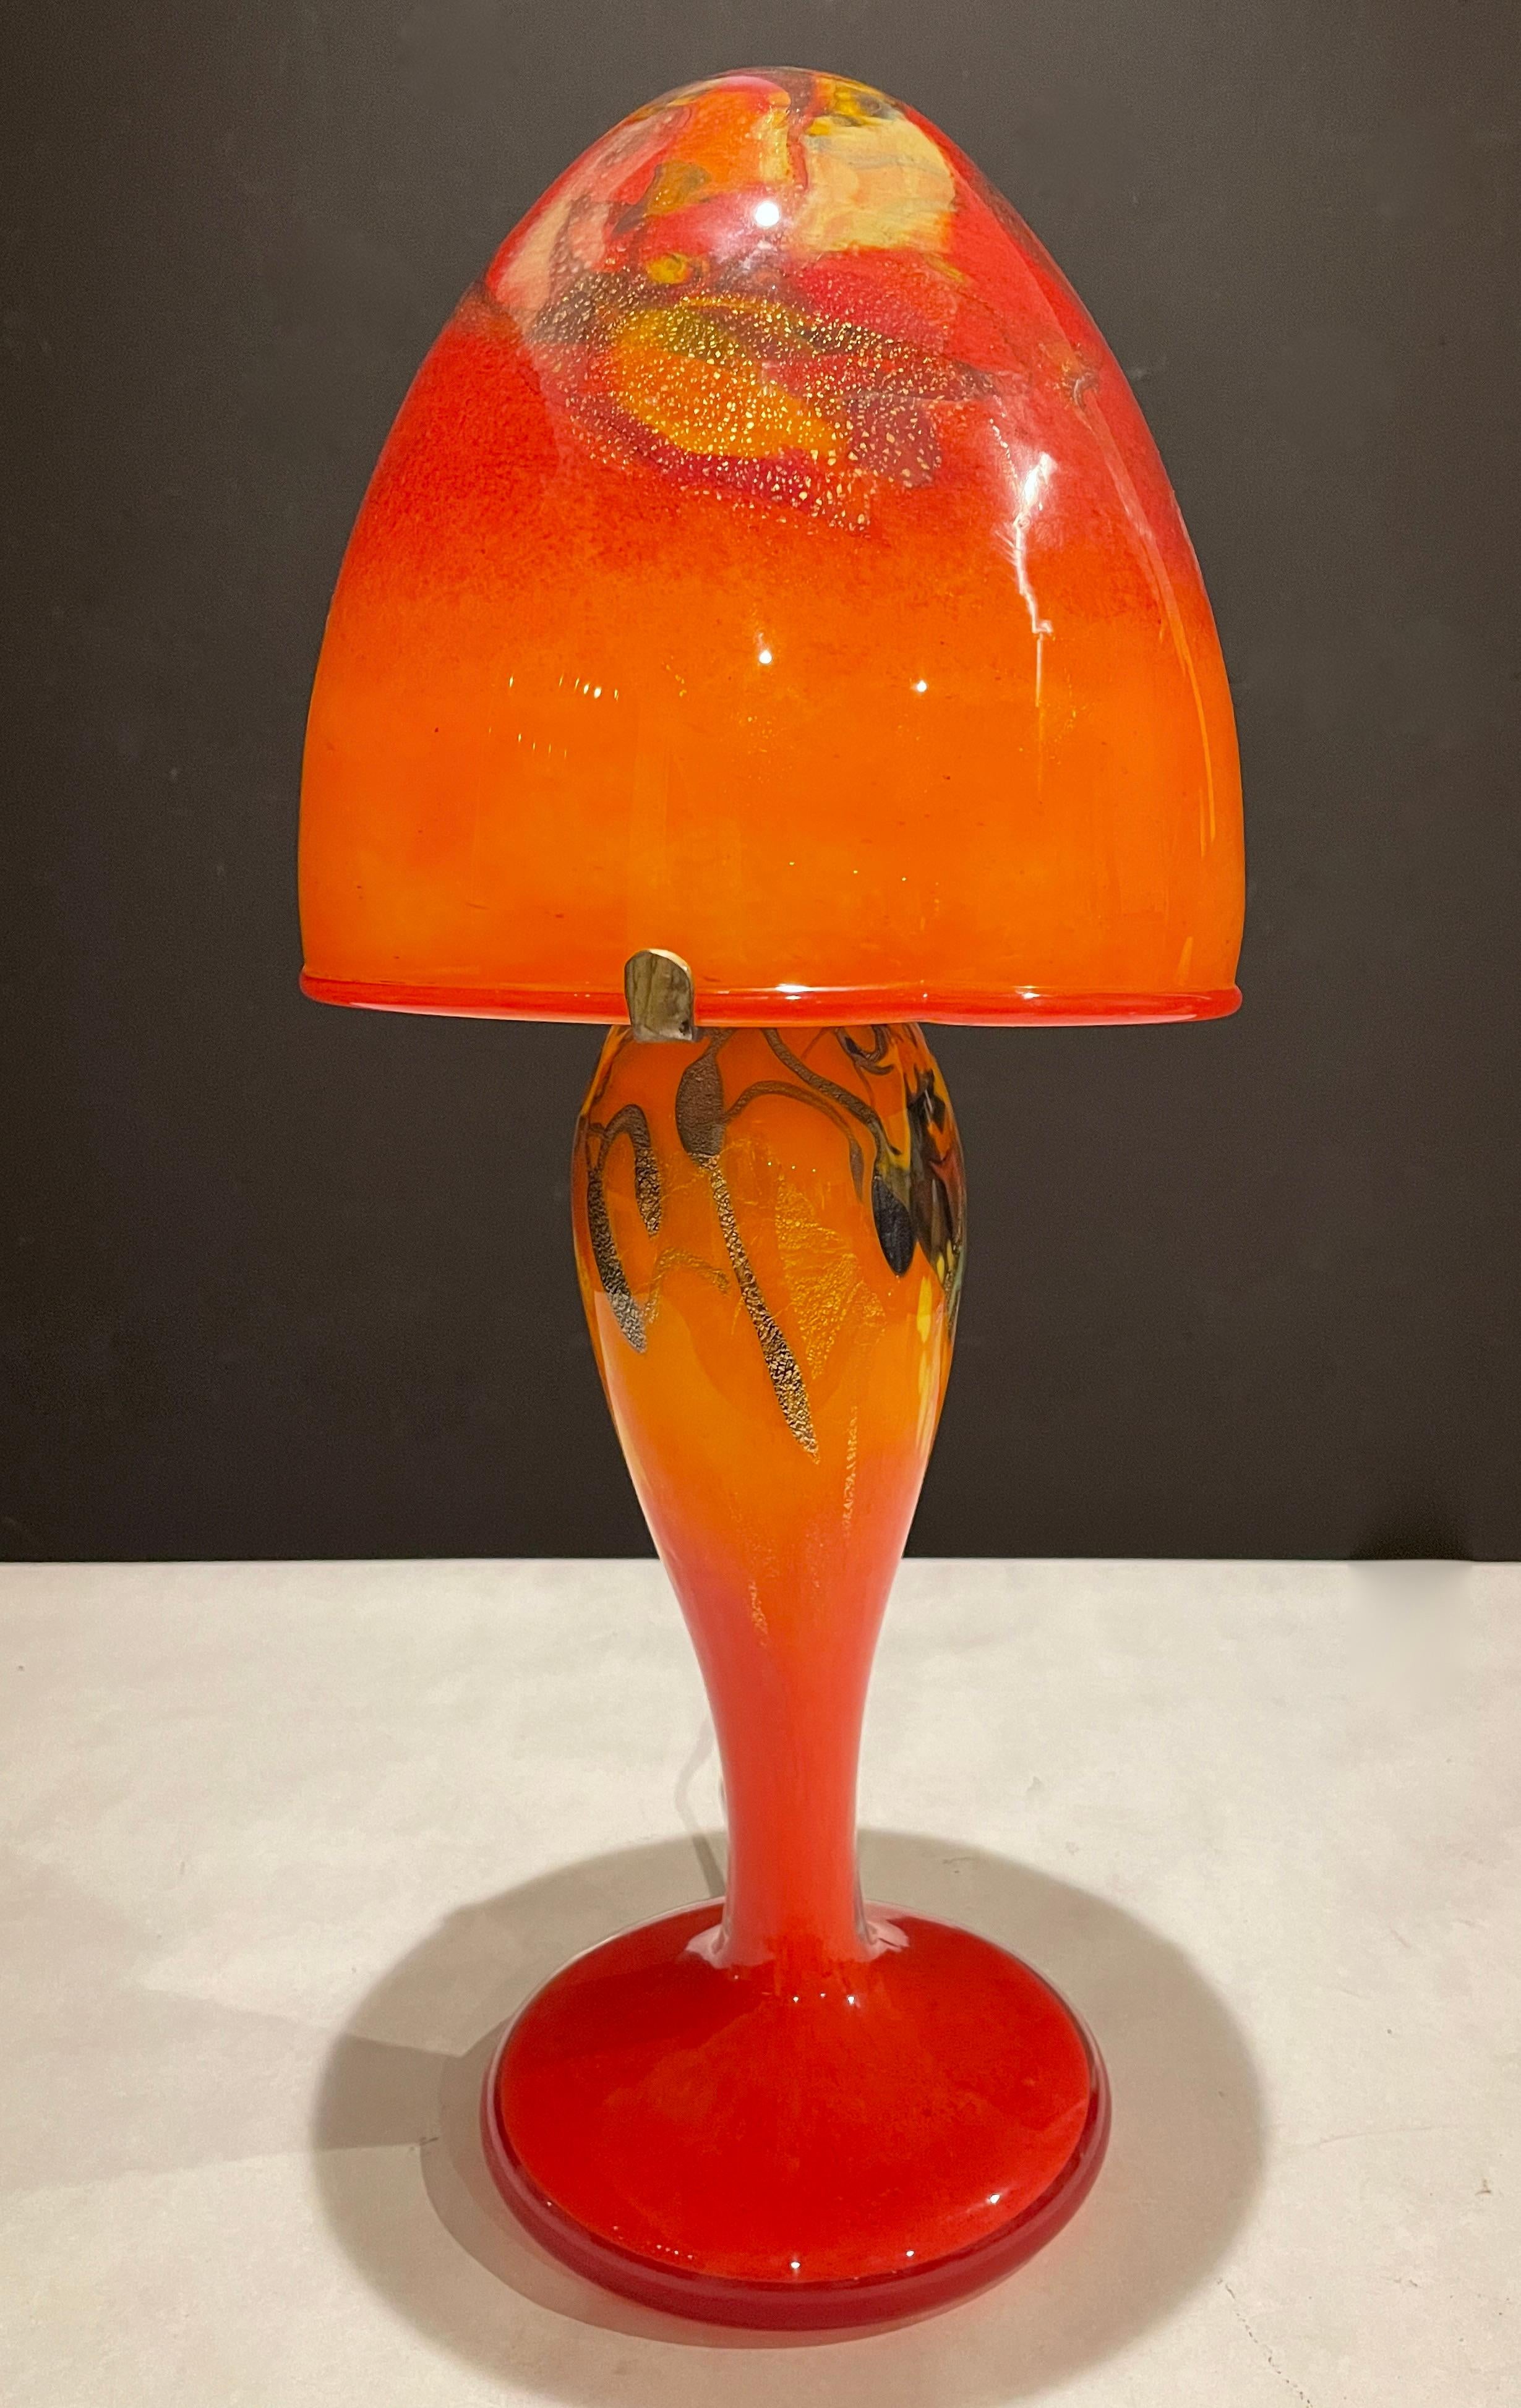 Modern hand blown art glass mushroom from art glass lamp by French glass designer and glass blower Pascal Guyot. Warm reds and oranges along with golden yellow and some darker tones. Signed and dated on base and shade.